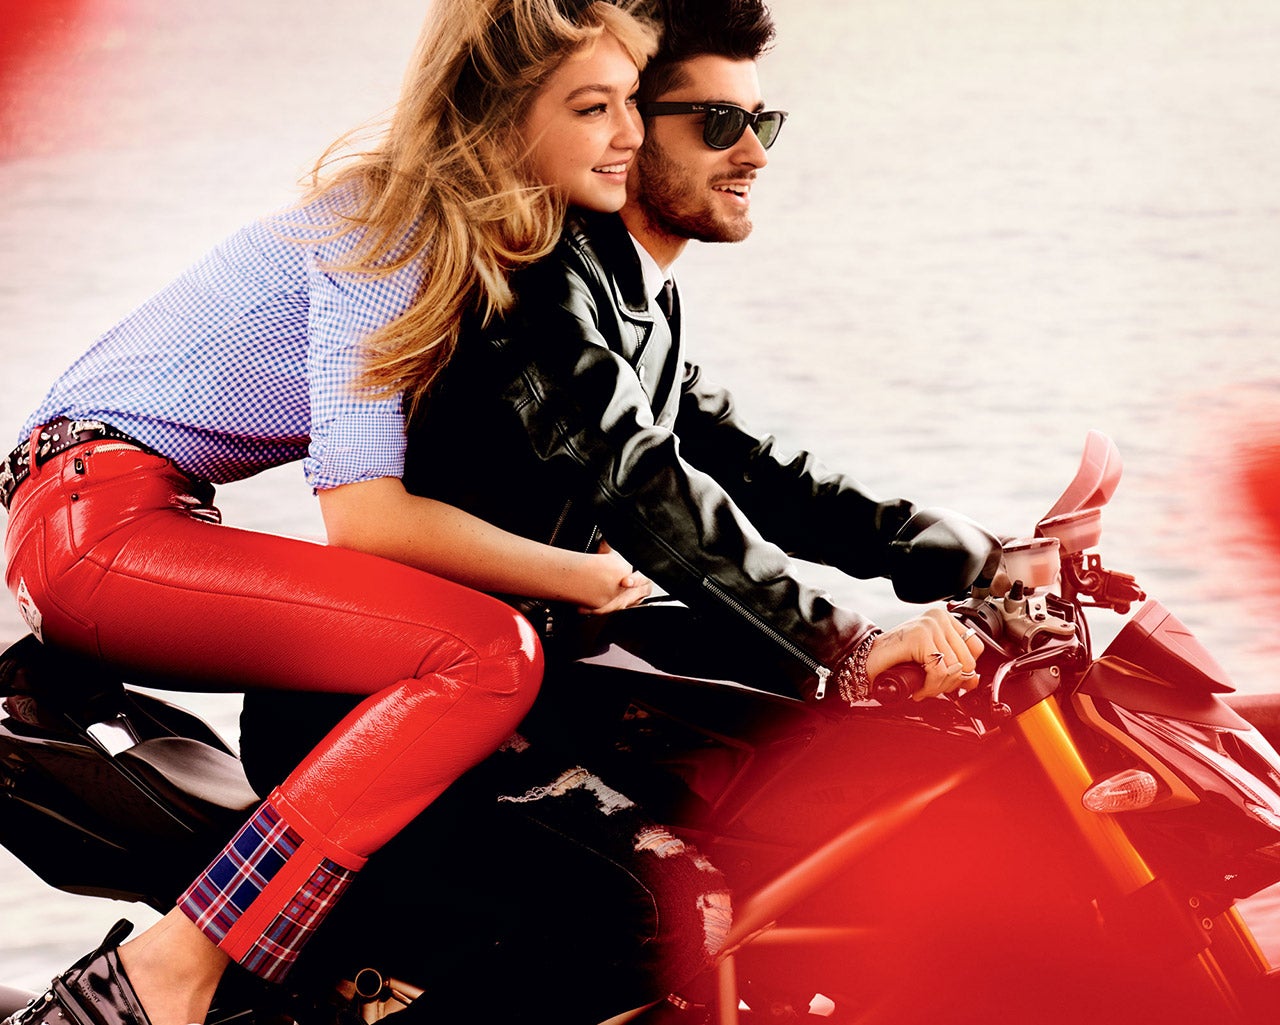 Gigi Hadid And Zayn Malik Look Crazy In Love And Beautiful In Romantic Vogue Photoshoot 